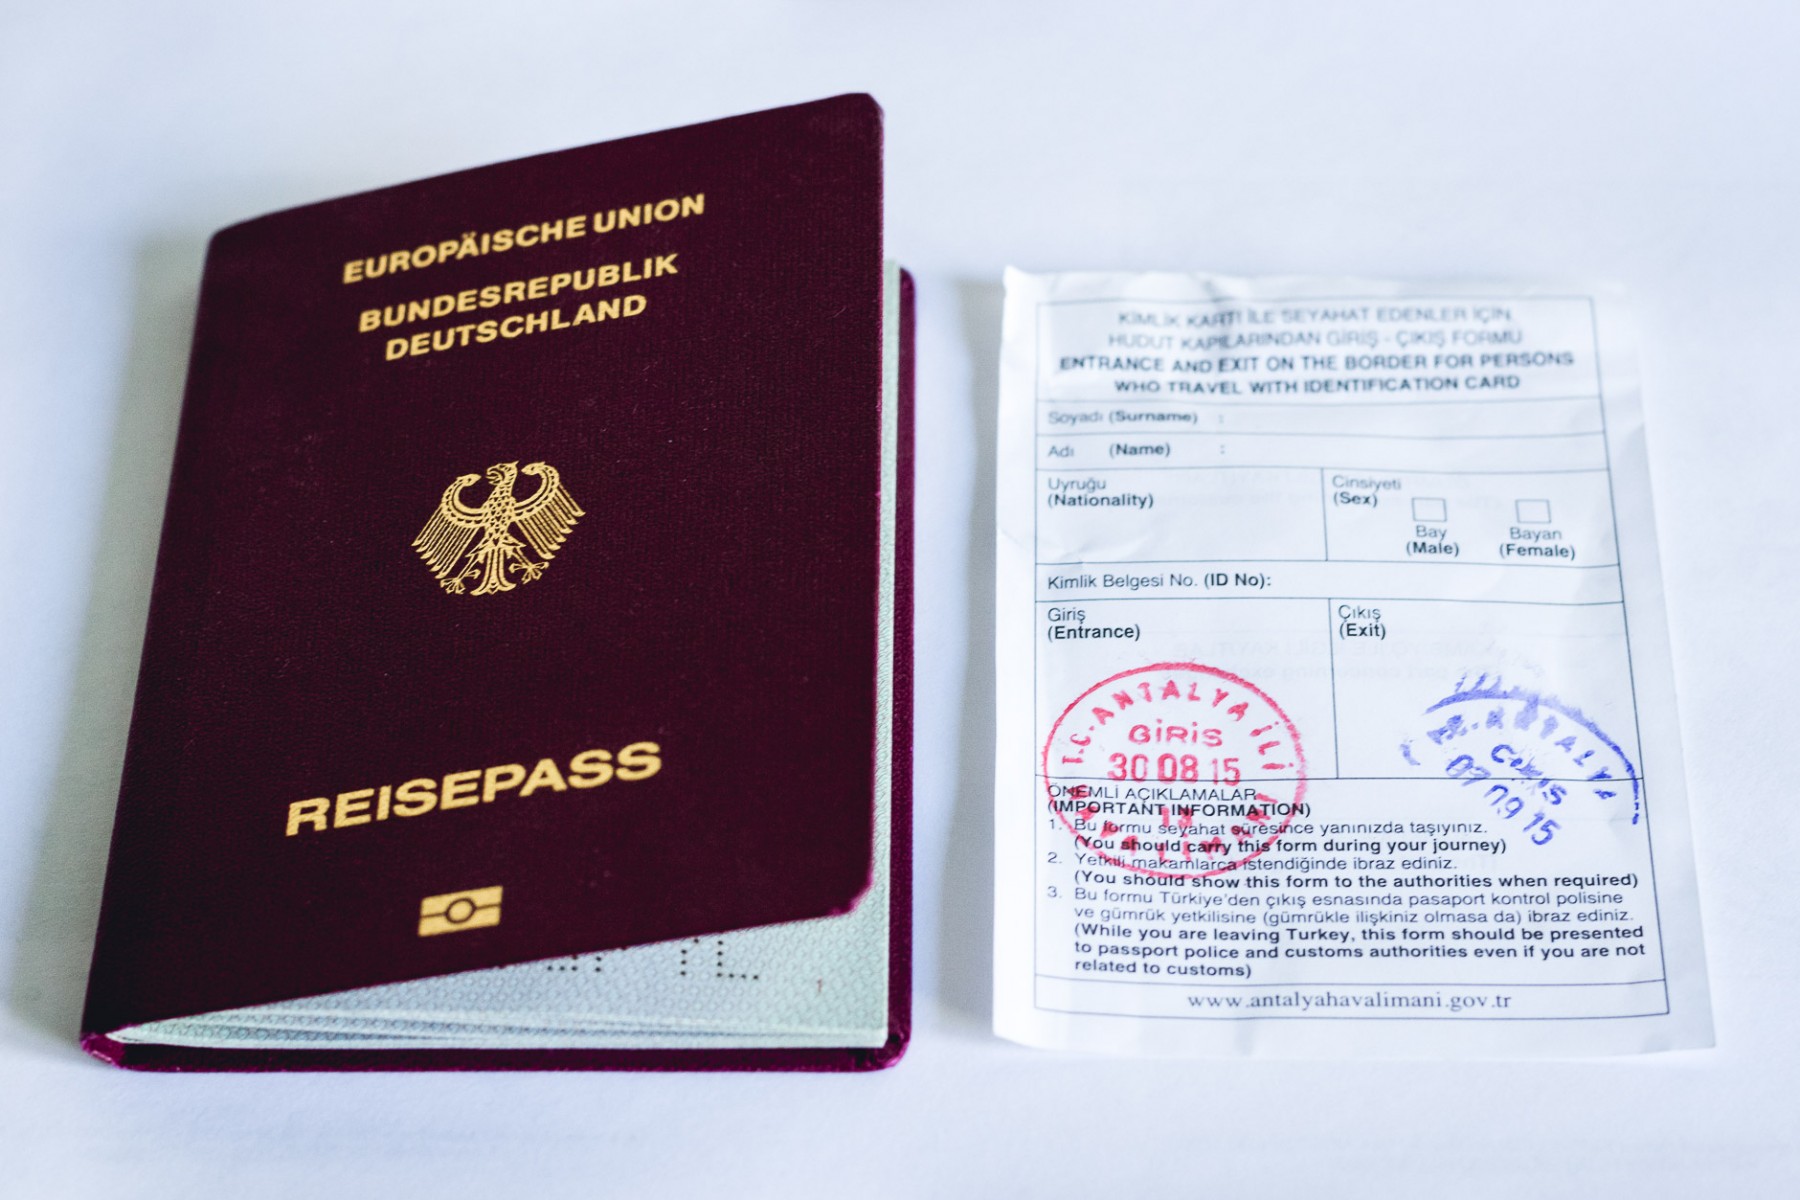 Traveling to Turkey with a Passport or an ID